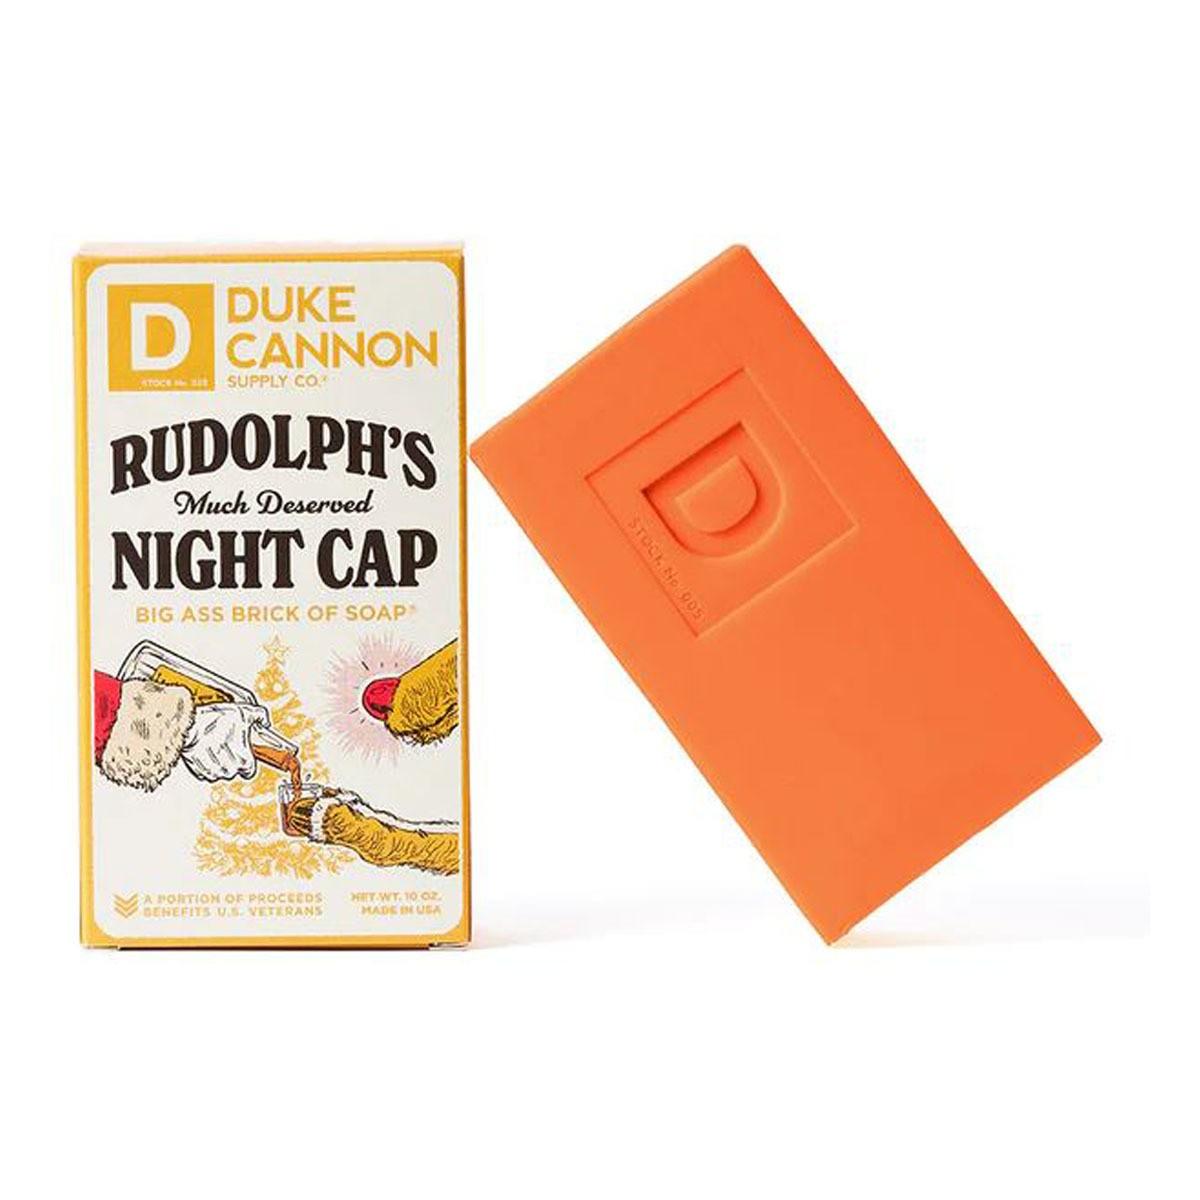 Rudolph's Much Deserved Night Cap Soap - Purpose-Built / Home of the Trades